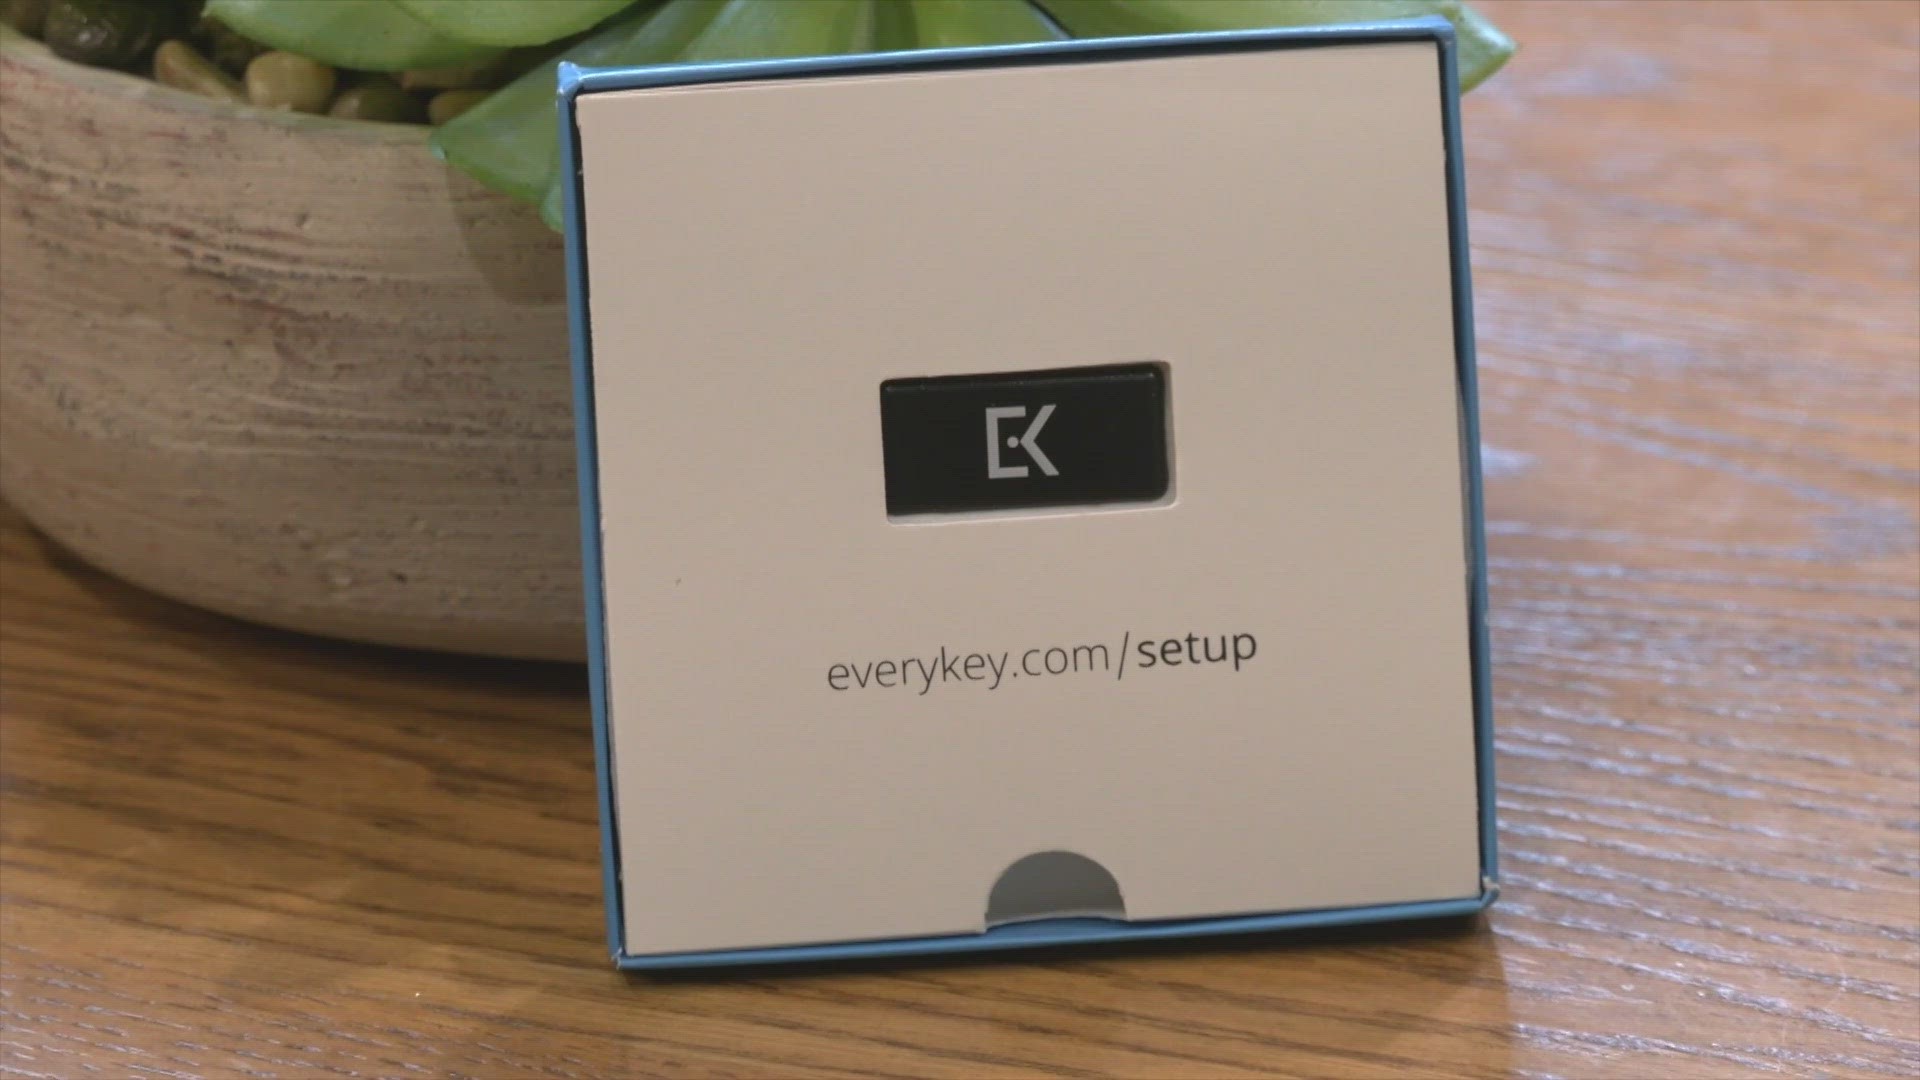 Since starting as a college project, Everykey has grown into partnerships with electronics giant LG and the Air Force. Now they are launching a new product.